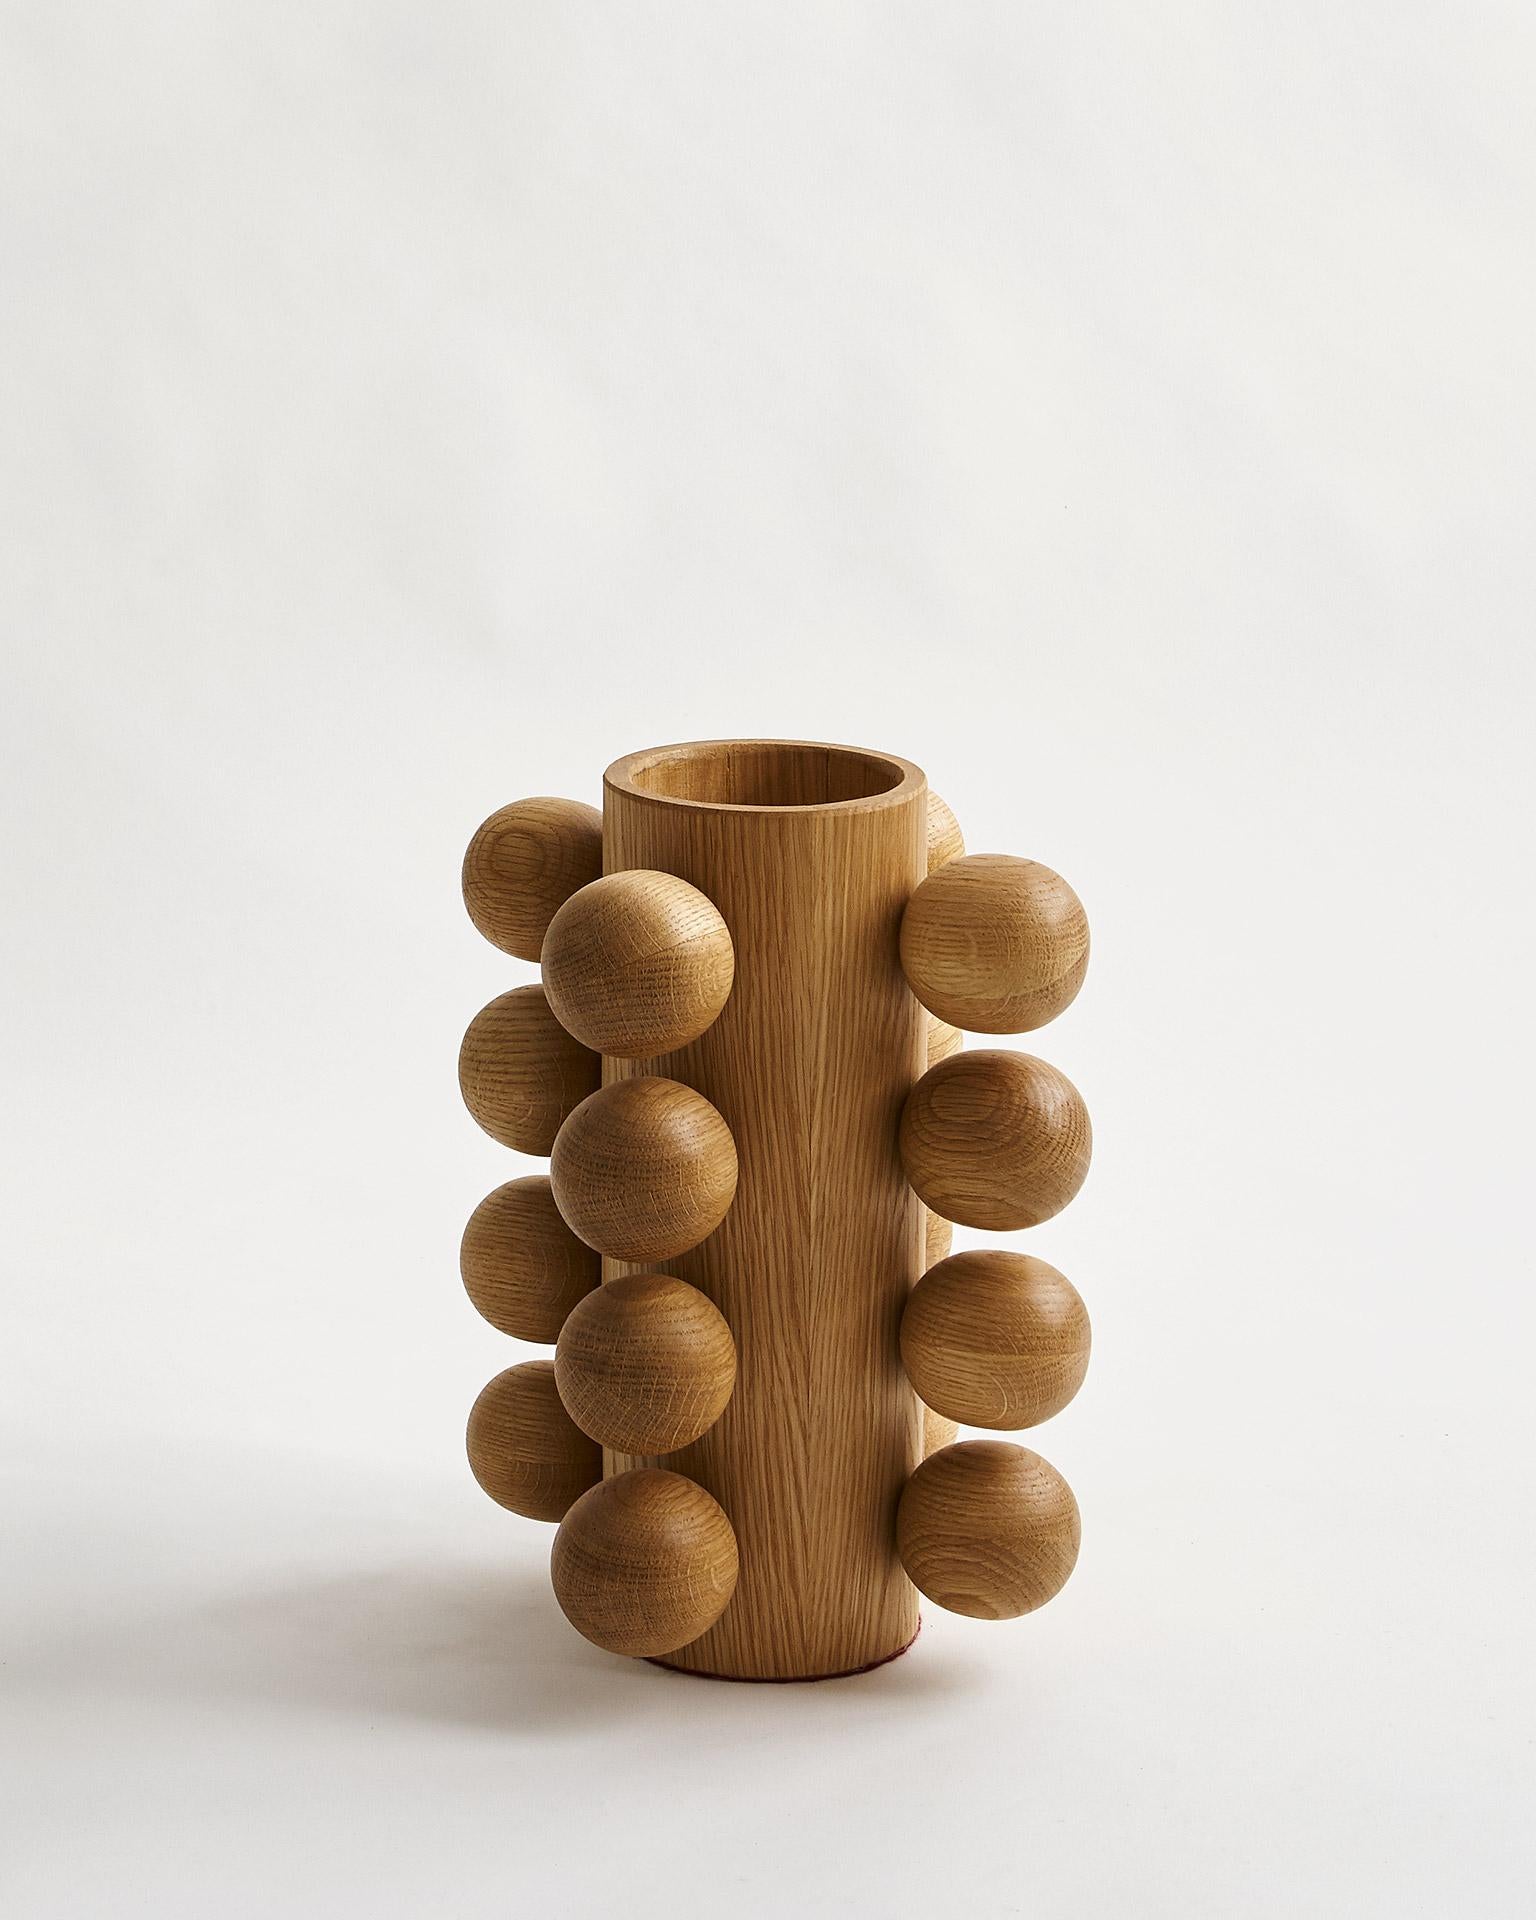 Handcrafted modern wood vase constructed of rift cut white oak with a matte natural poly finish. This made-to-order, eye-catching vase is part of the Studio Line collection, known as the Bubble Vase. Available in white, black, or natural finish. Not